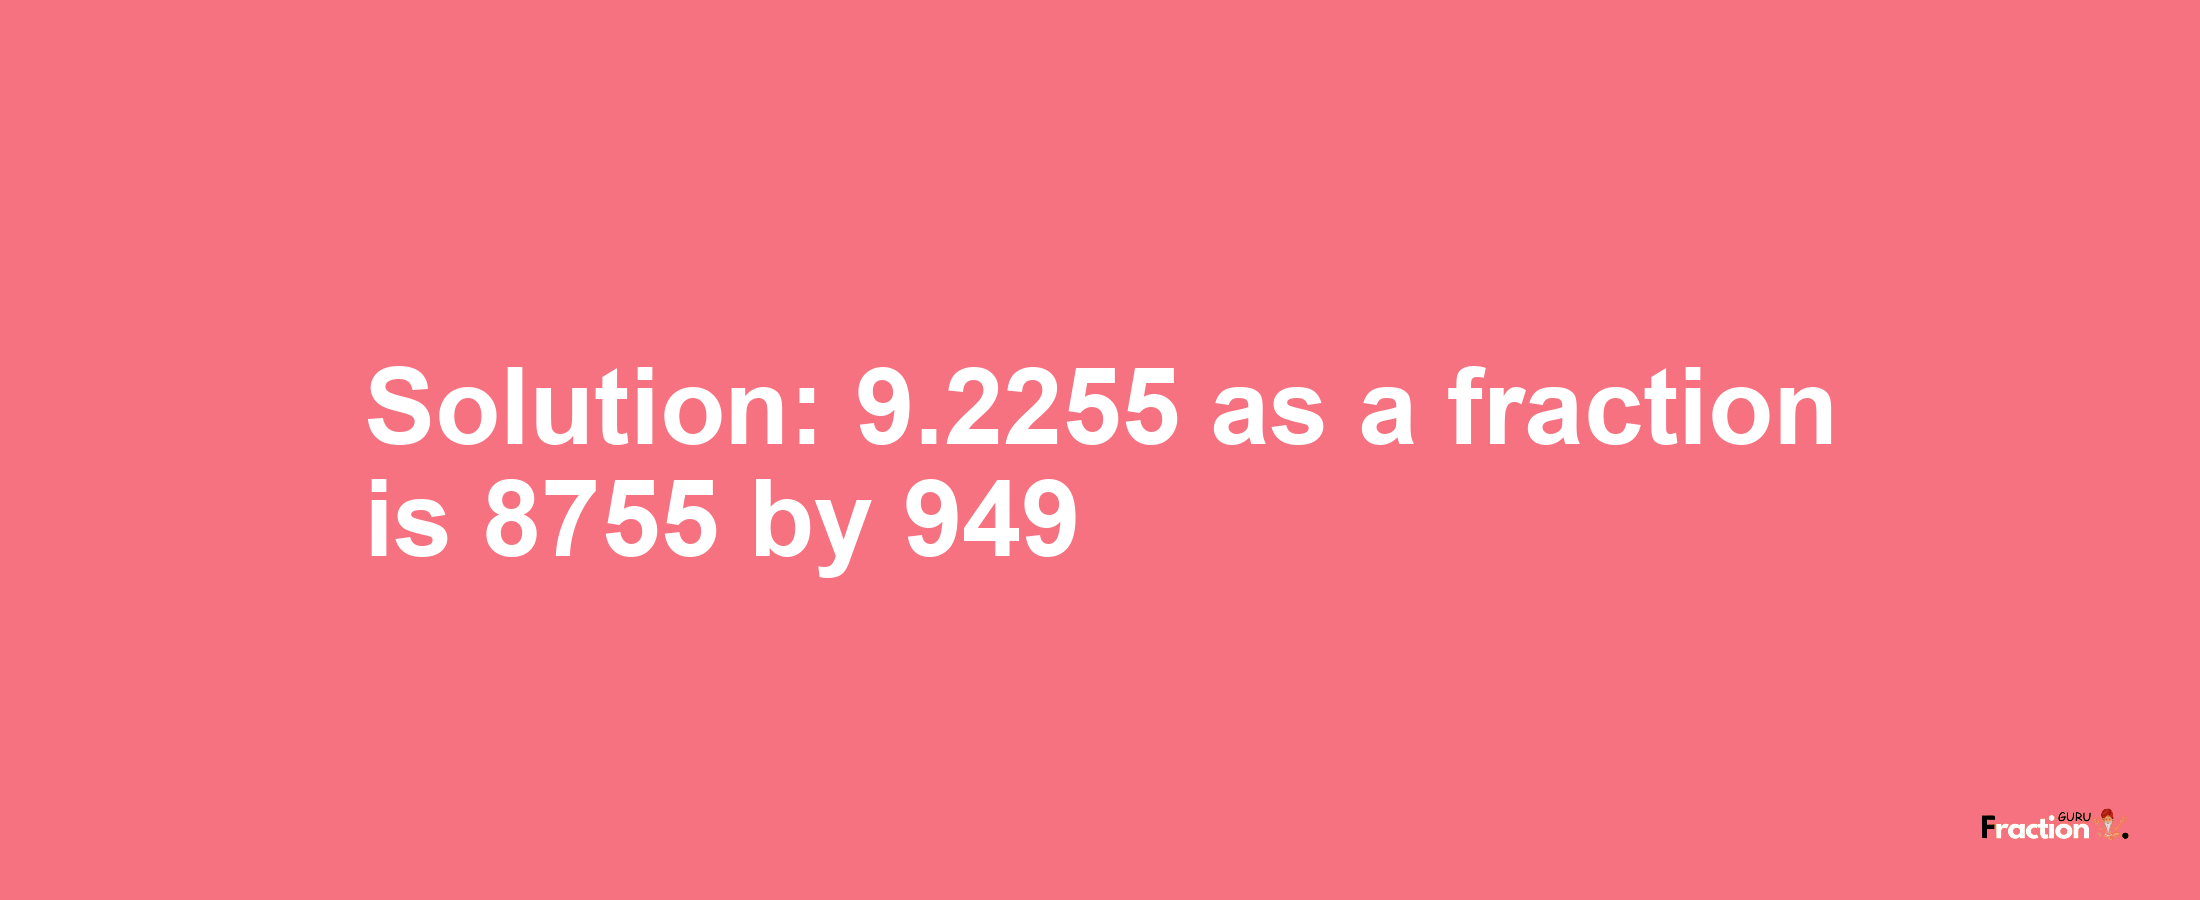 Solution:9.2255 as a fraction is 8755/949